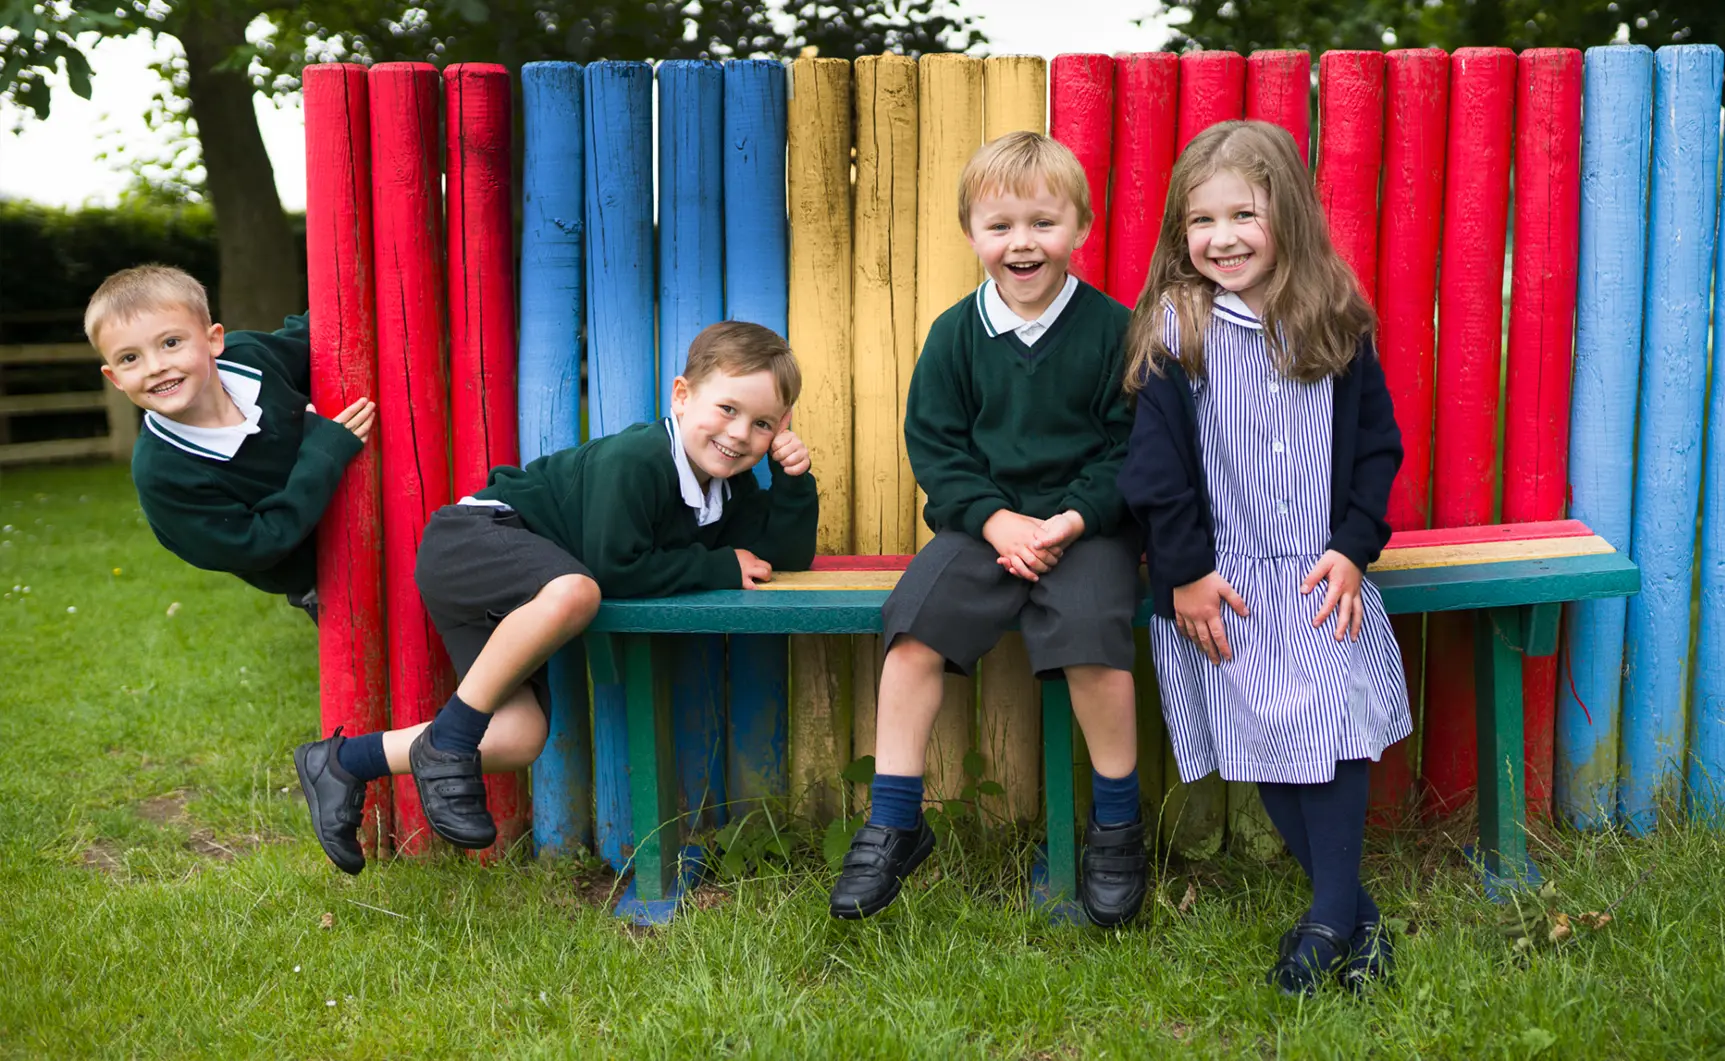 Experience our three nurturing and dynamic schools by coming to one of our Prep School Open Mornings.